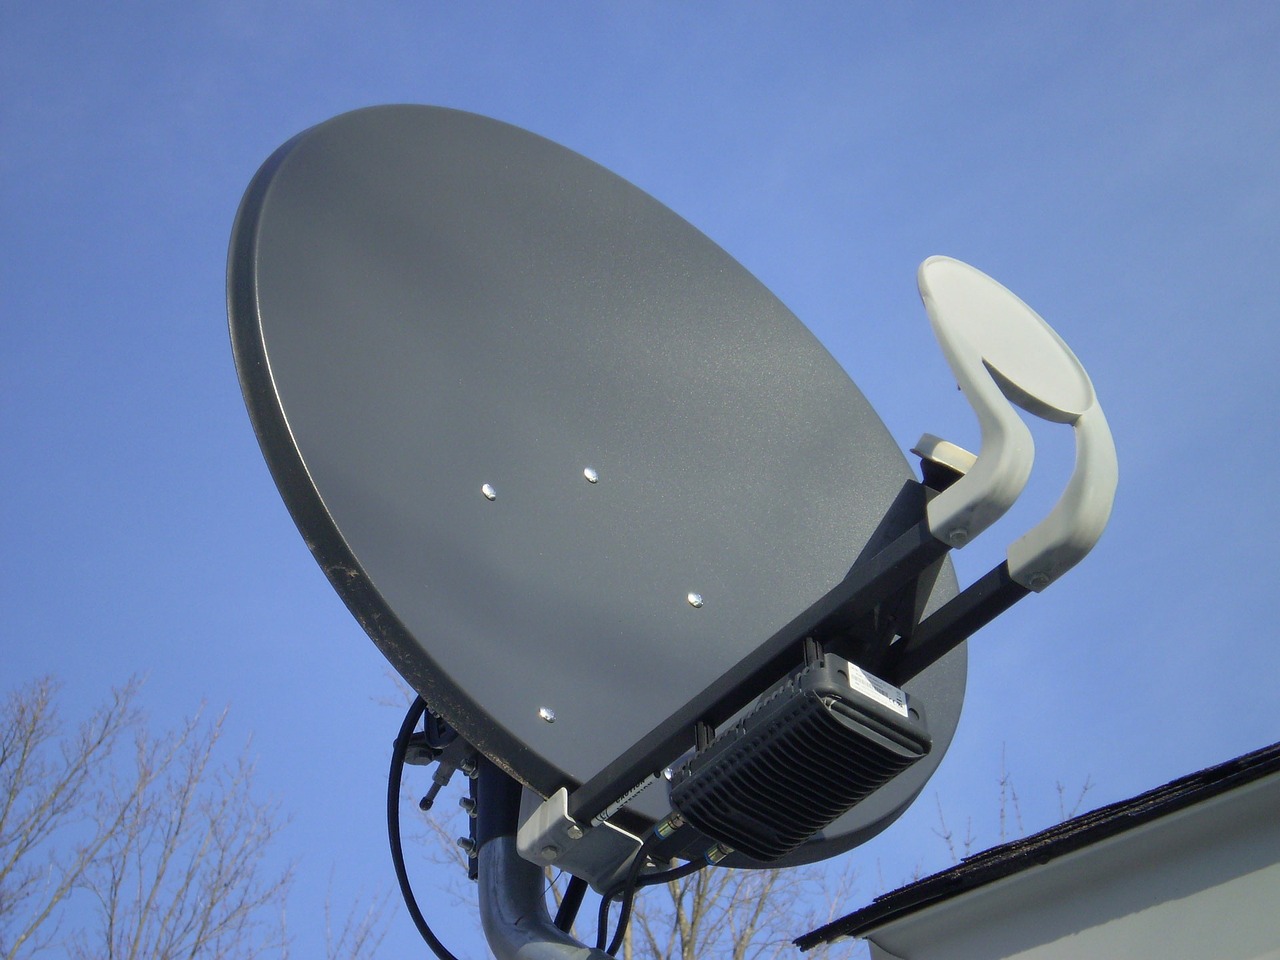 Why isn’t my Satellite Dish working? The Satellite Dish Troubleshooting Guide